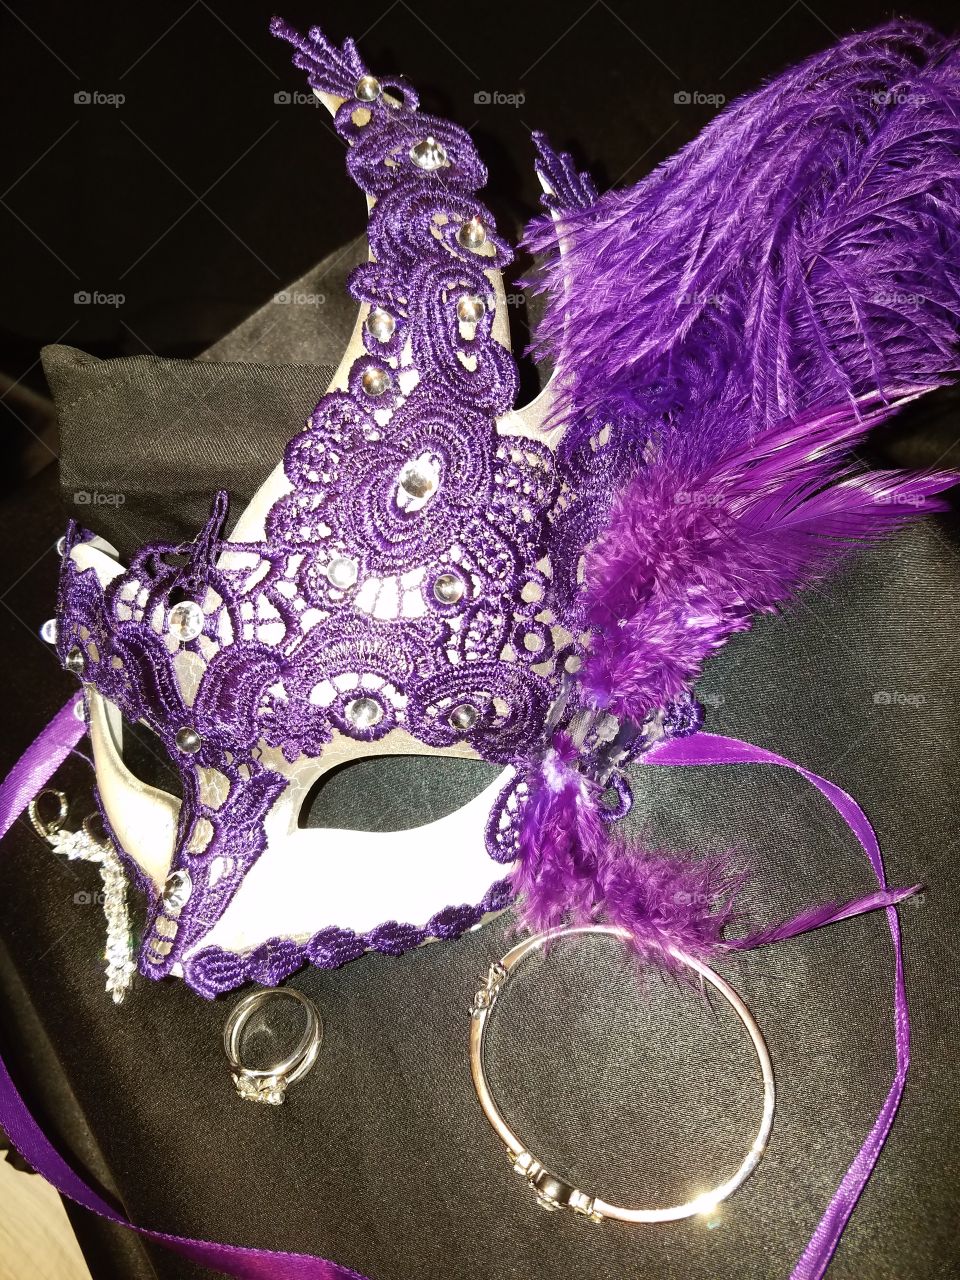 purple lace white mask with purple feathers purple satin ribbons. Diamond Jewelry earrings ,Florida Lou ring and bracelet on a satin black background.